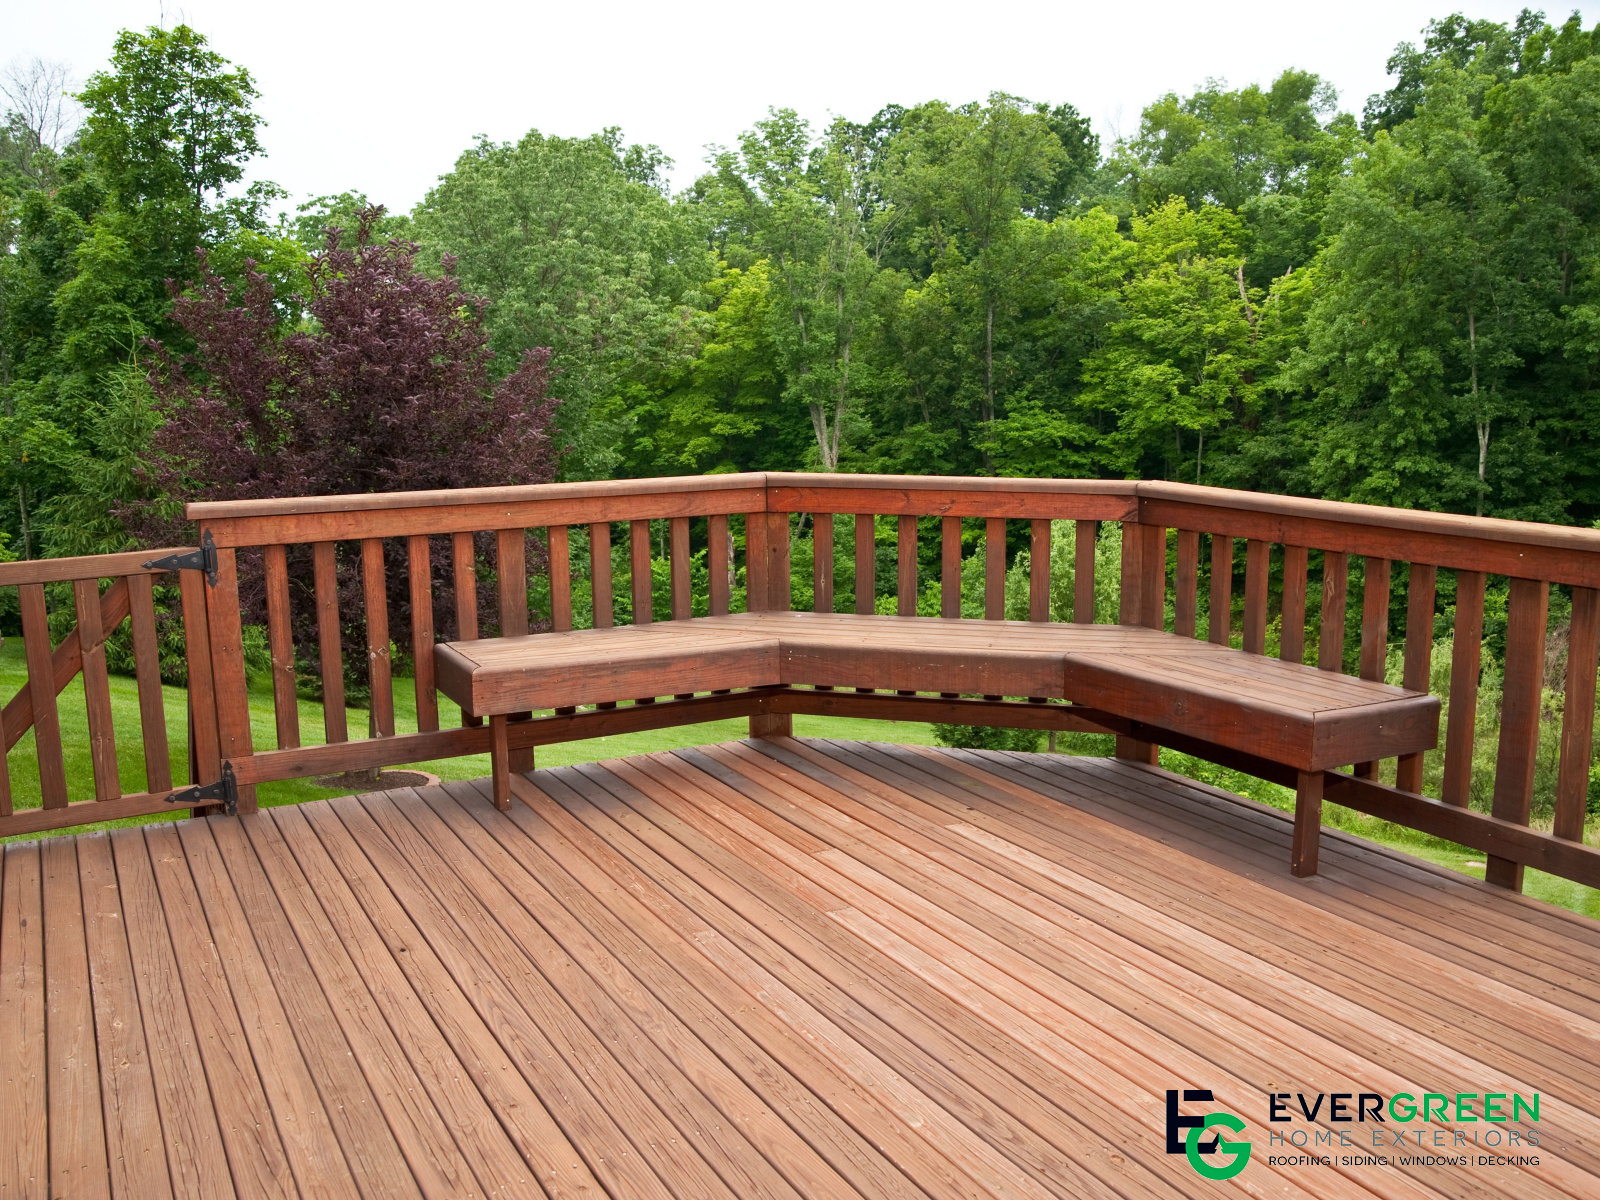 Selecting the Perfect Railings for Your Deck Installation